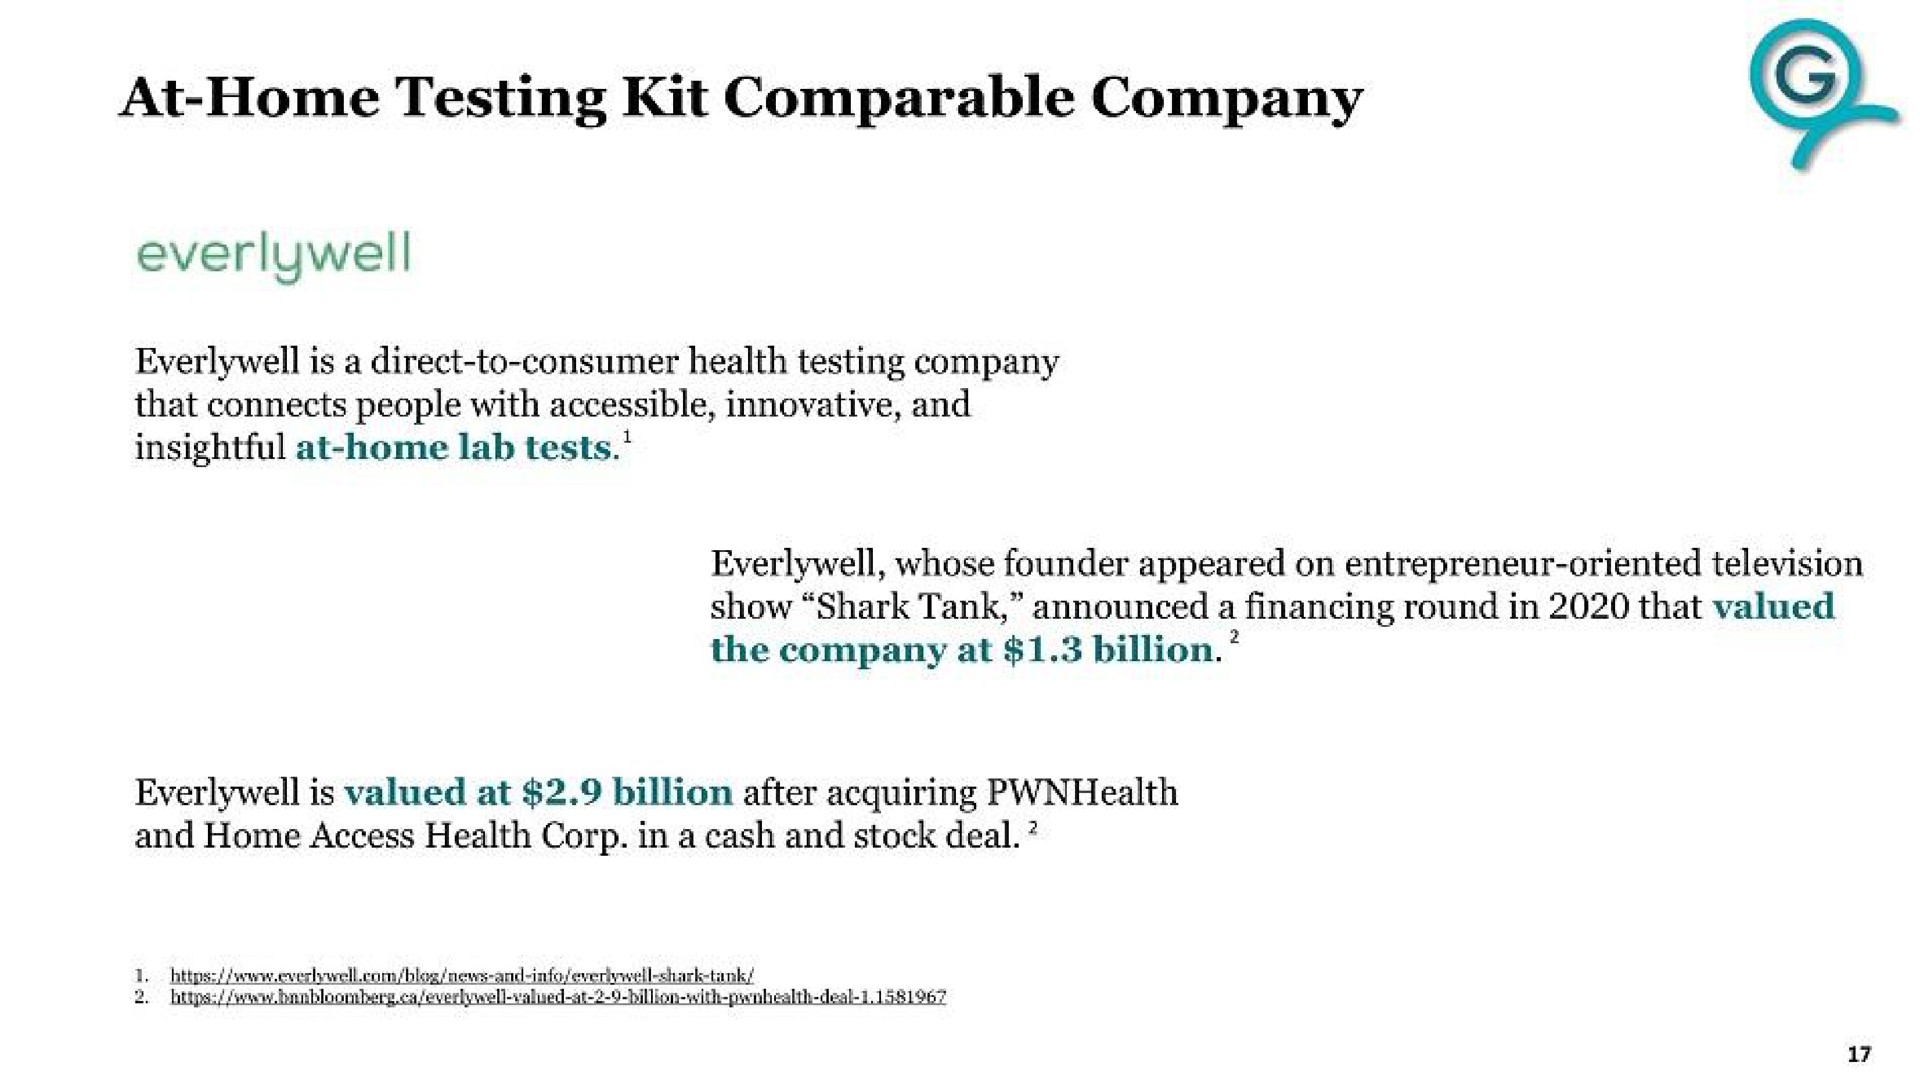 at home testing kit comparable company | G Medical Innovations